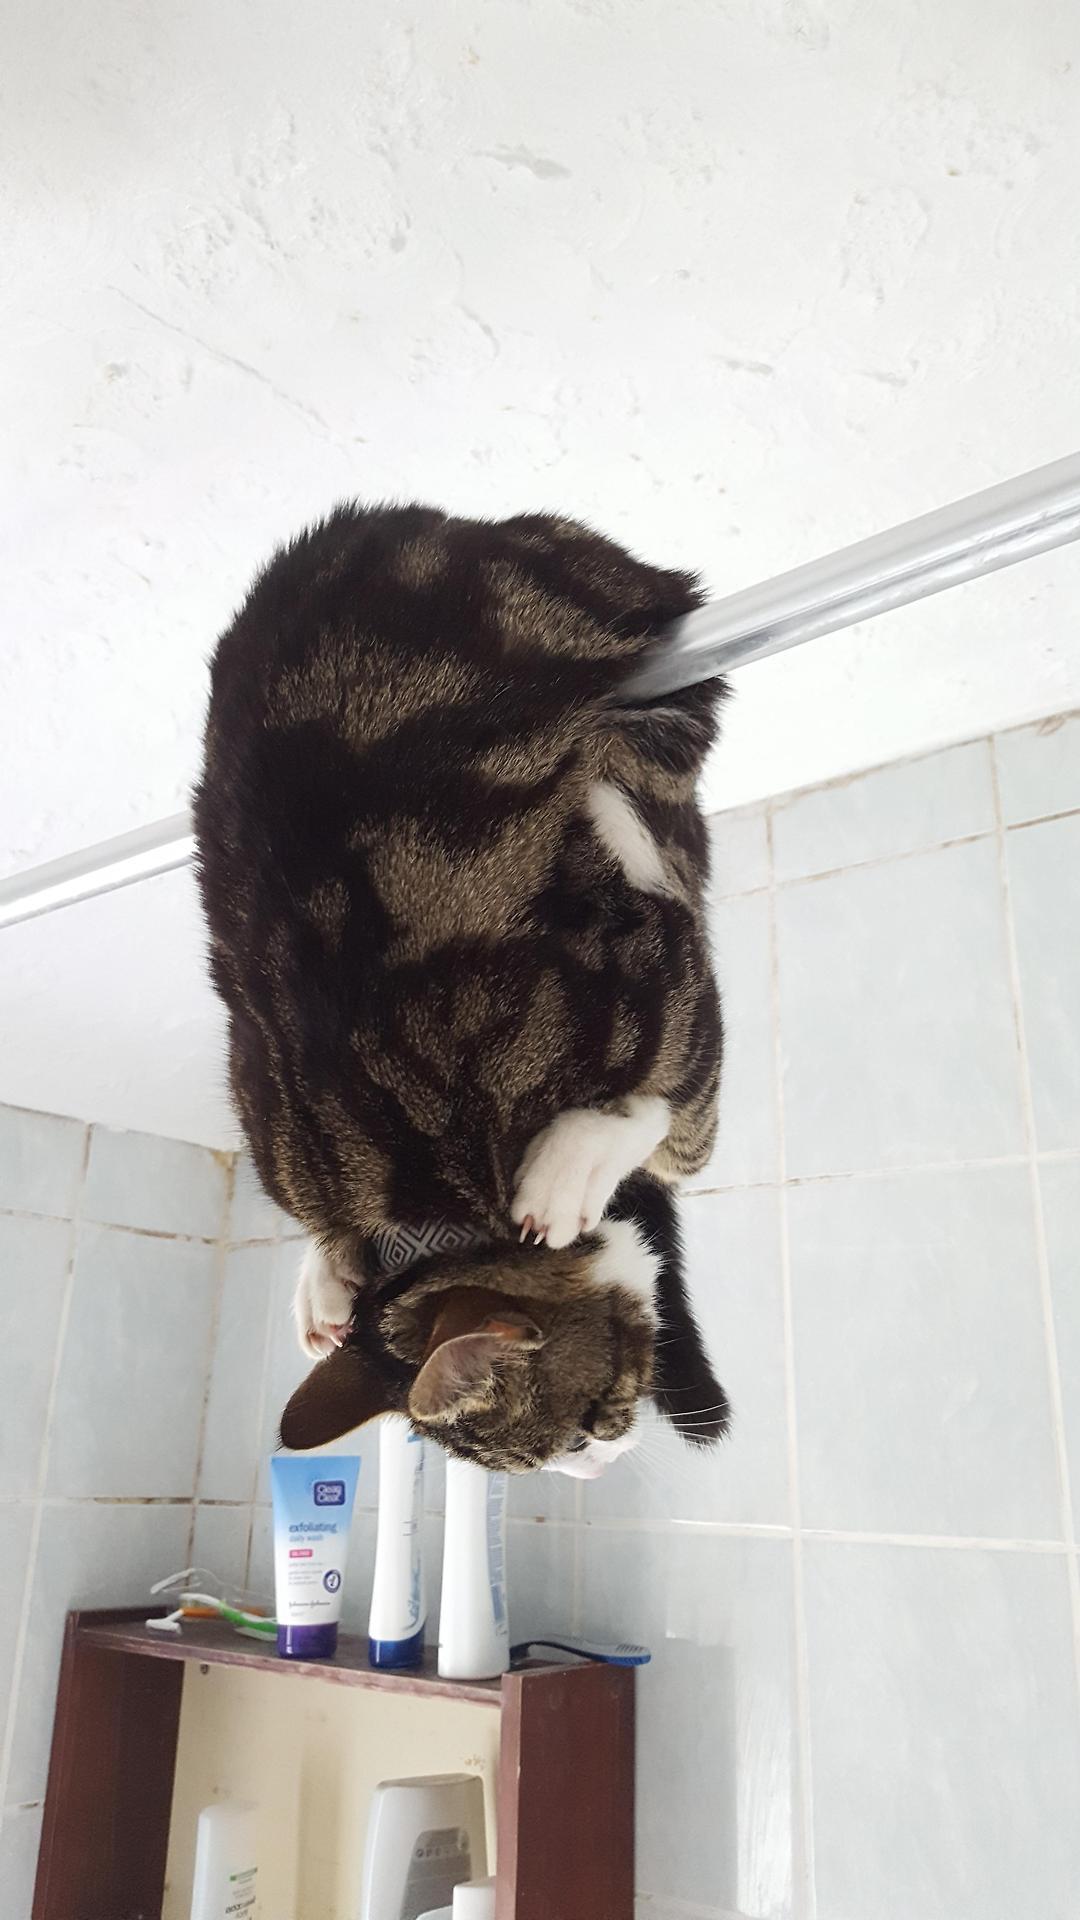 cute-pet-animals-aww:This is how my friend found the cat in the bathroom